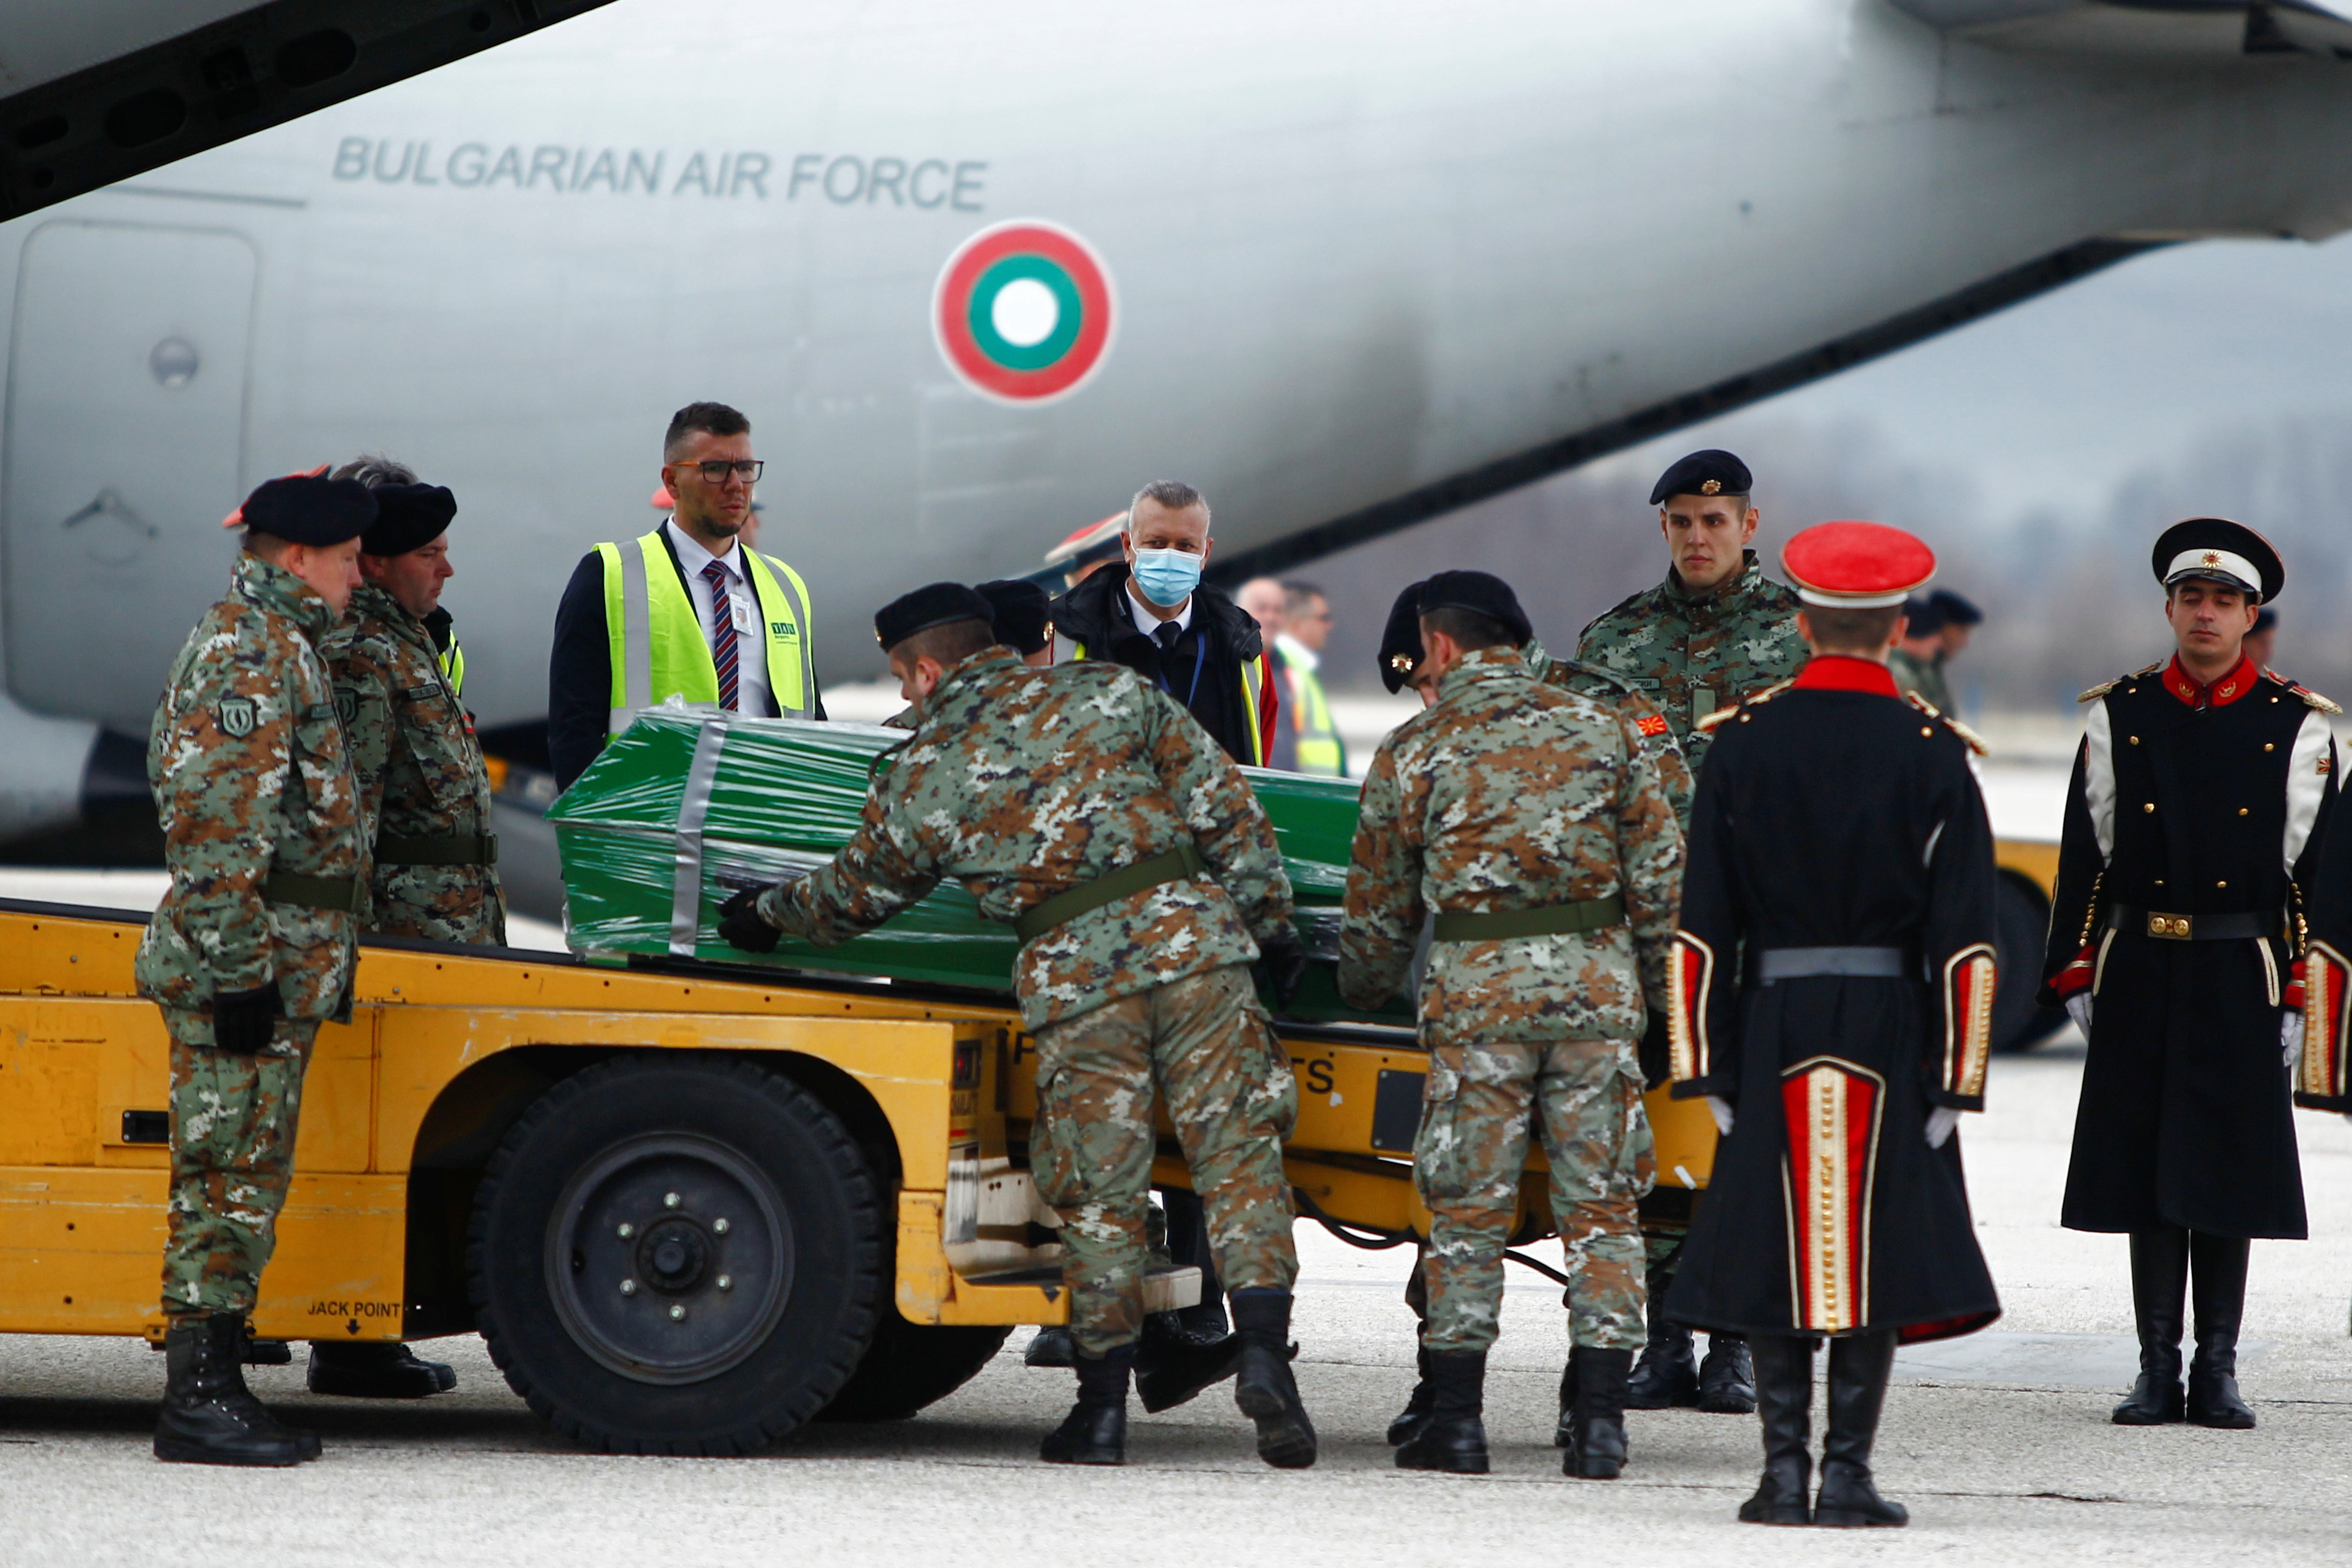 Soldiers unload coffins of the victims of last week's deadly bus crash in Bulgaria, after their arrival by Bulgarian military airplanes at the Skopje Airport, North Macedonia December 3, 2021. REUTERS/Ognen Teofilovski